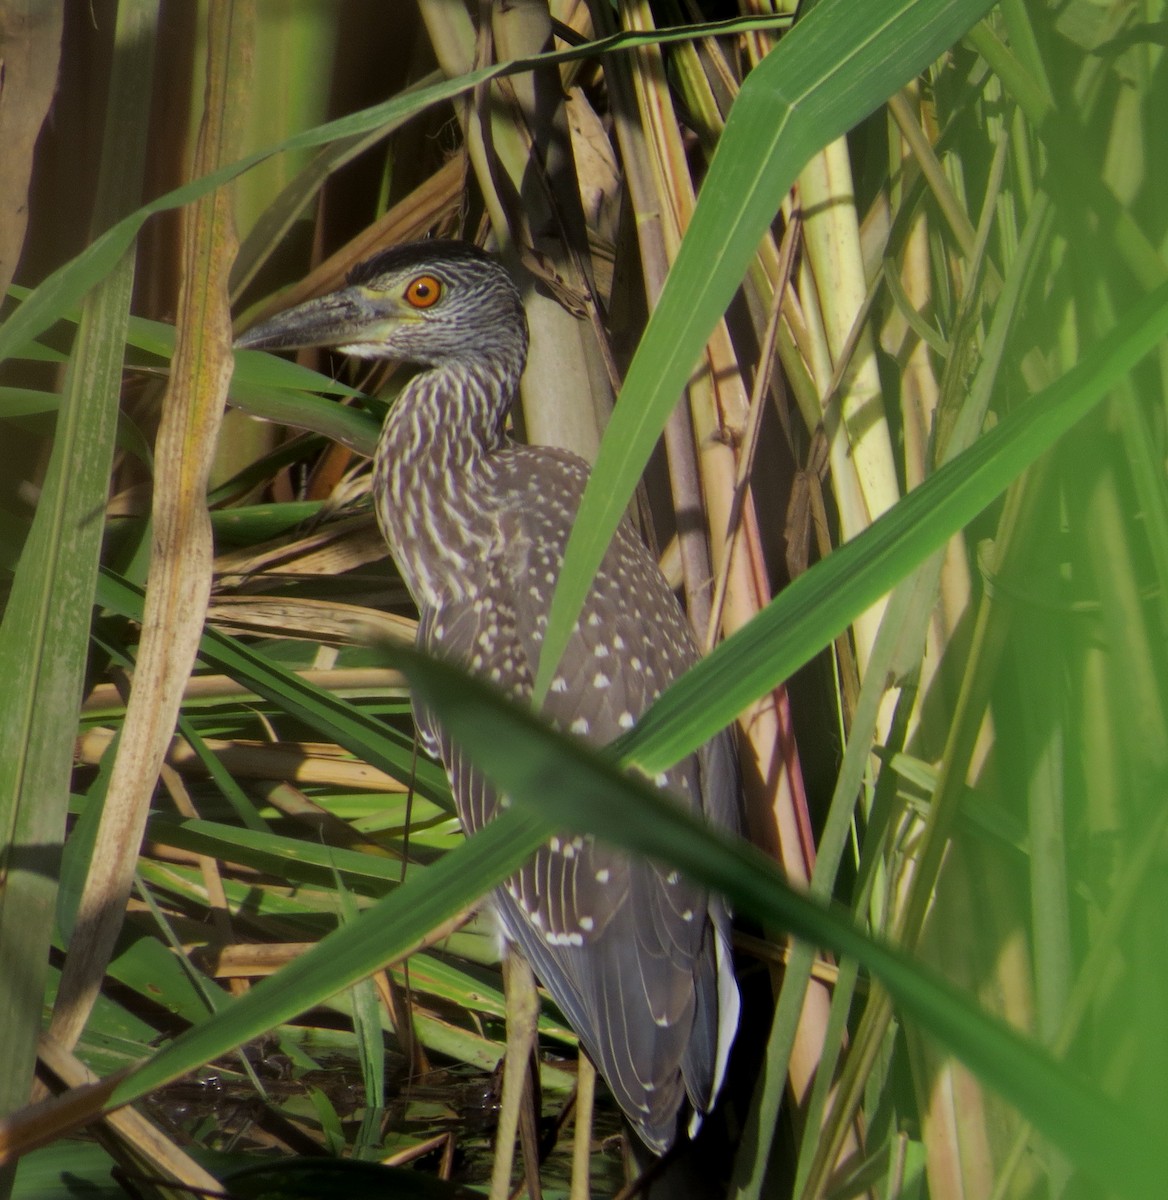 Yellow-crowned Night Heron - Lois Stacey